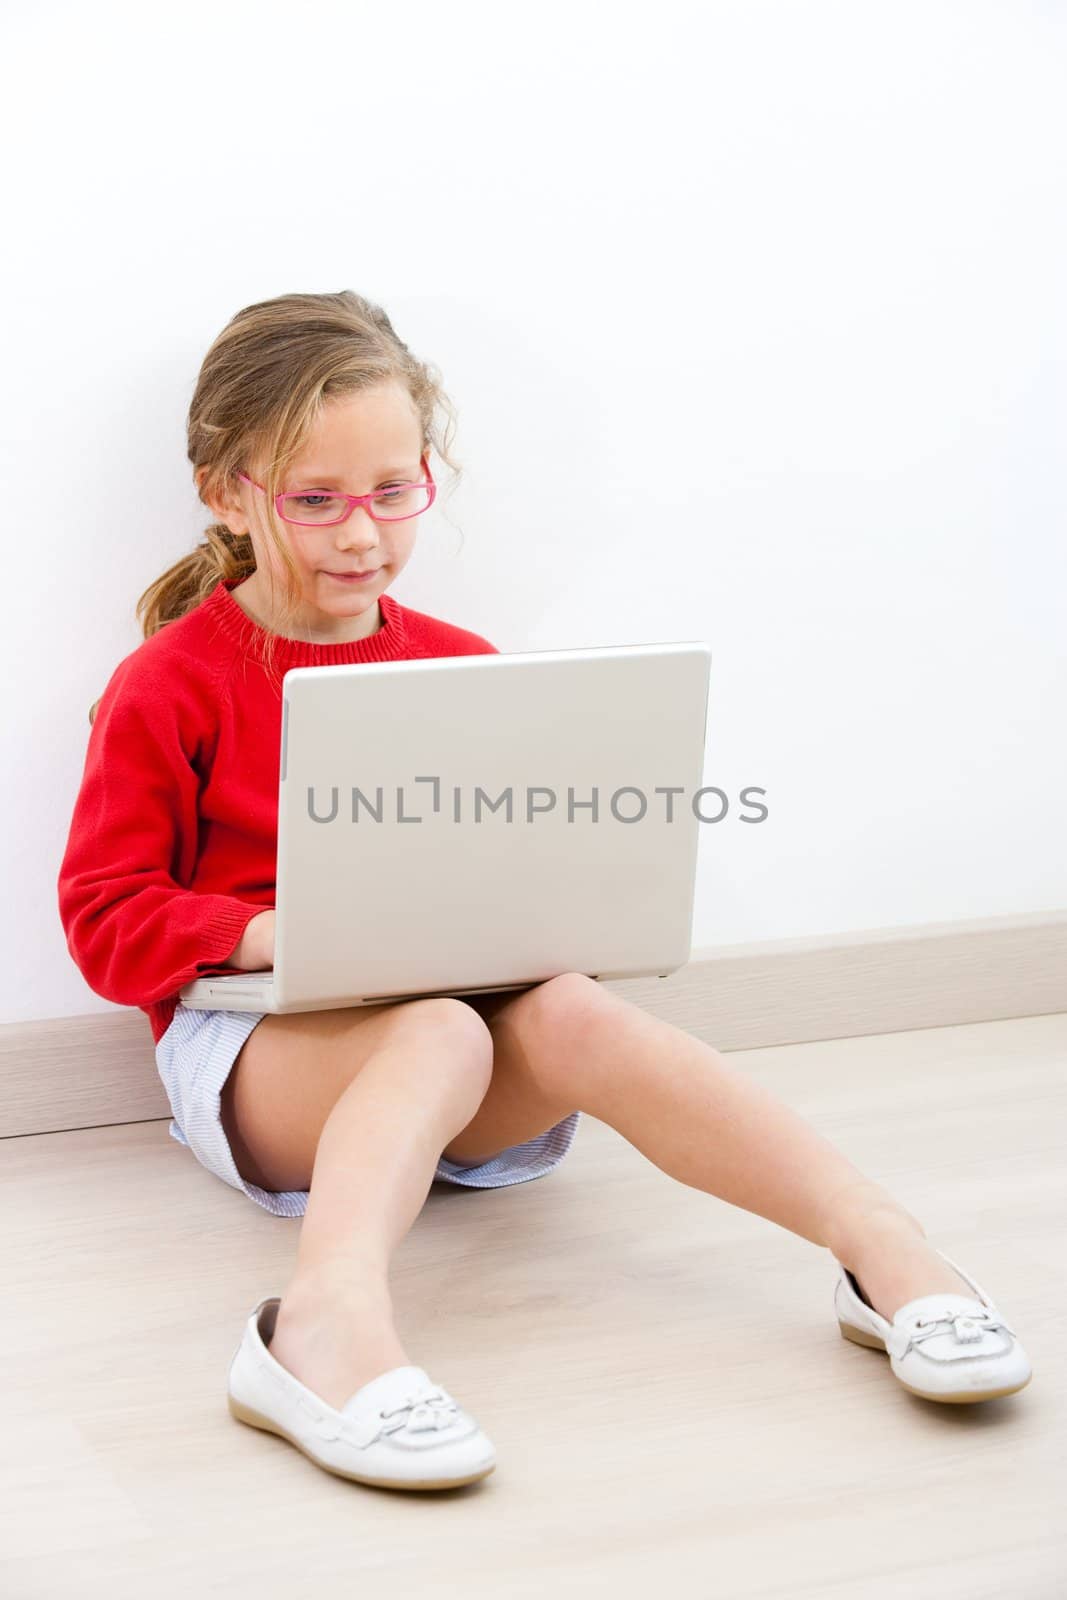 Young girl at home with laptop. by karelnoppe